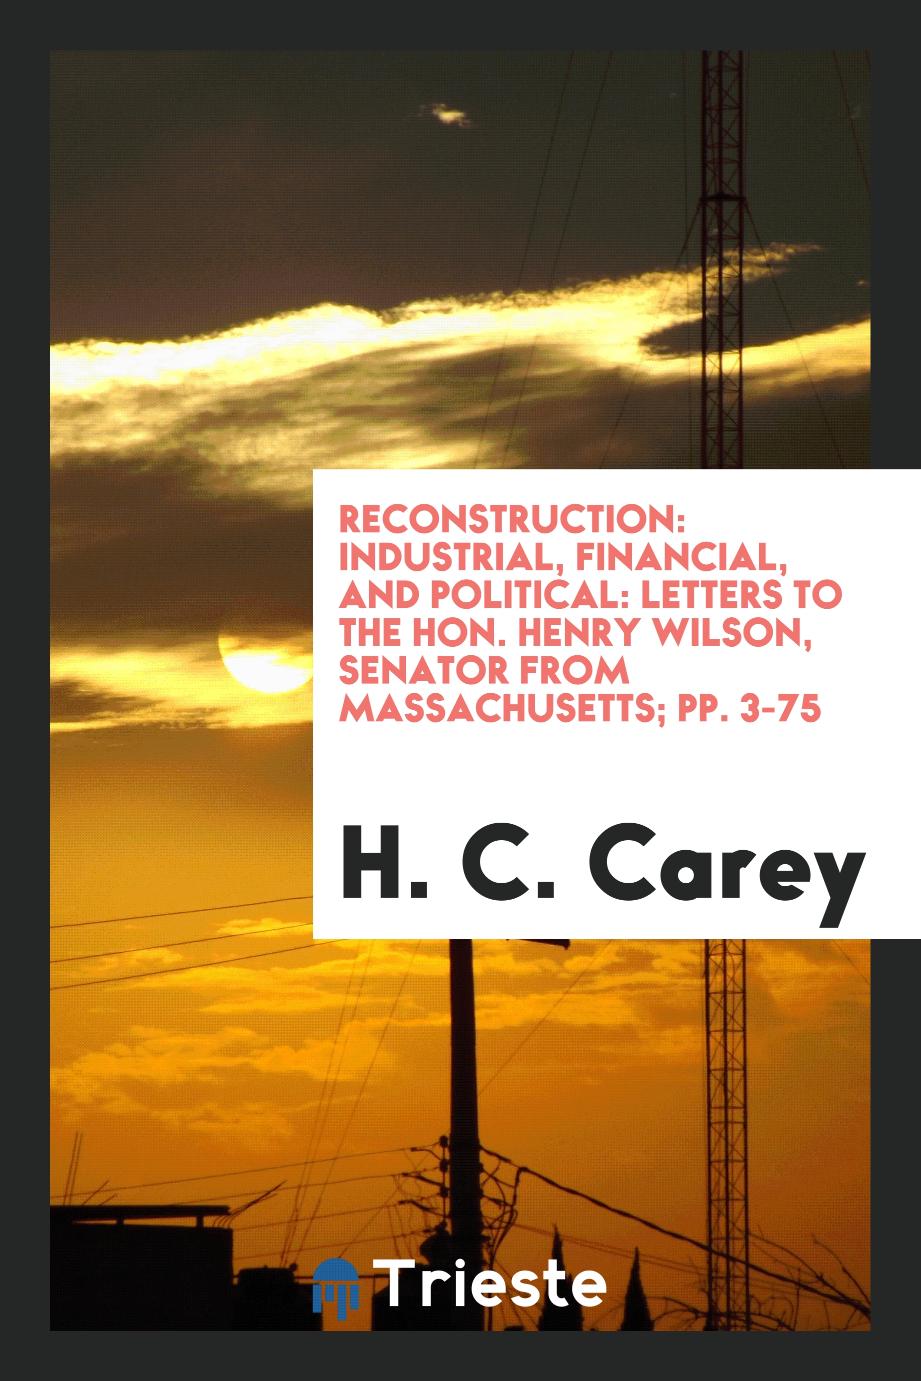 Reconstruction: Industrial, Financial, and Political: Letters to the Hon. Henry Wilson, Senator from Massachusetts; pp. 3-75